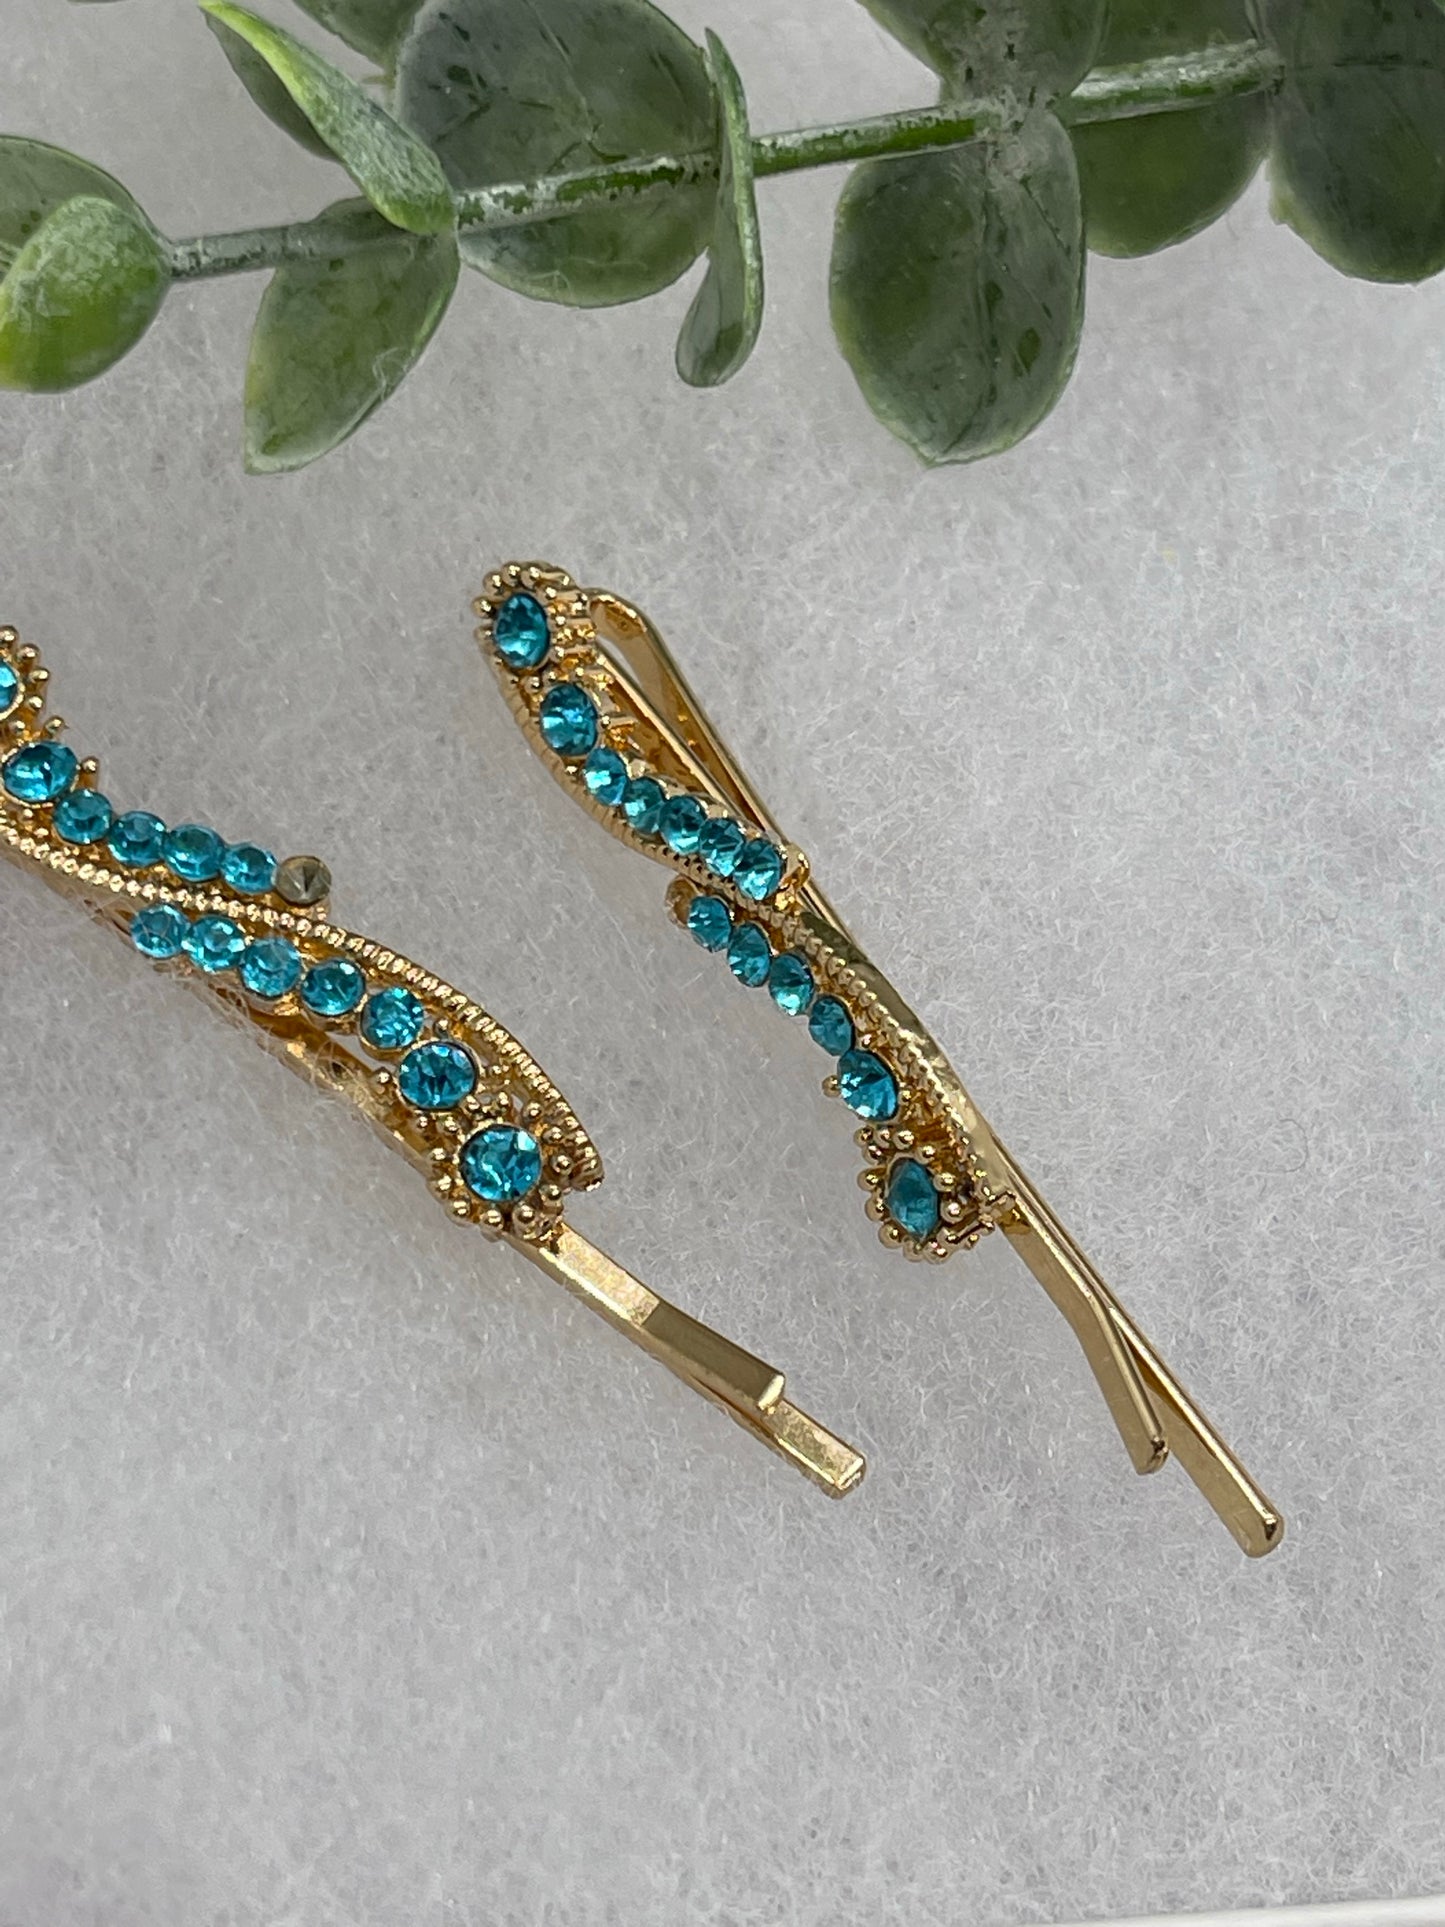 Teal crystal rhinestone approximately 2.0” gold tone hair pins 2 pc set wedding bridal shower engagement formal princess accessory accessories